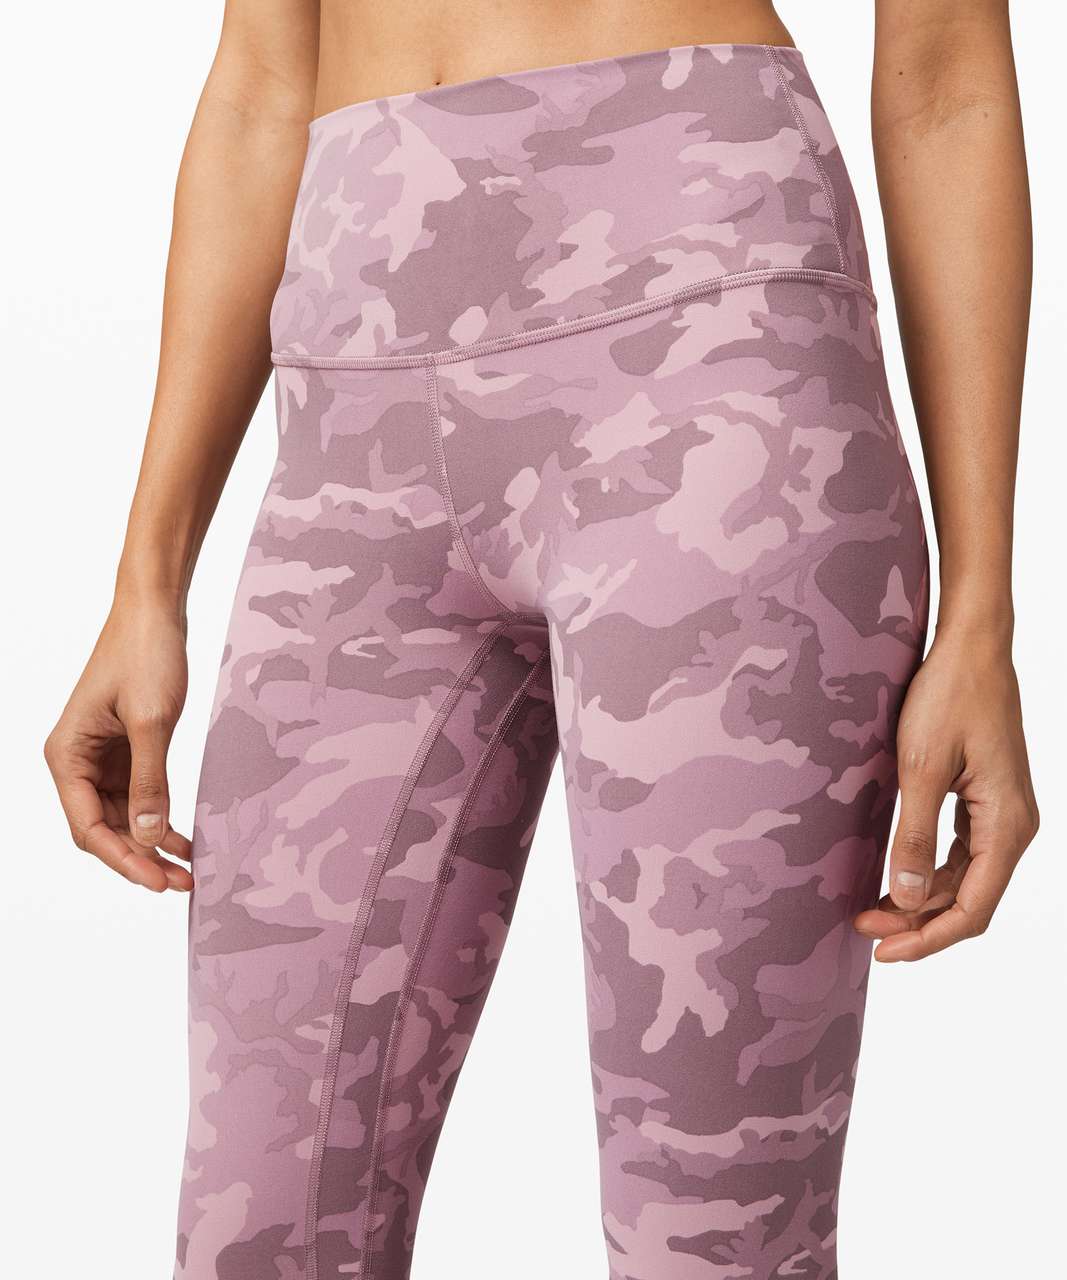 lululemon Align™ High-Rise Pant 25, Pink Taupe